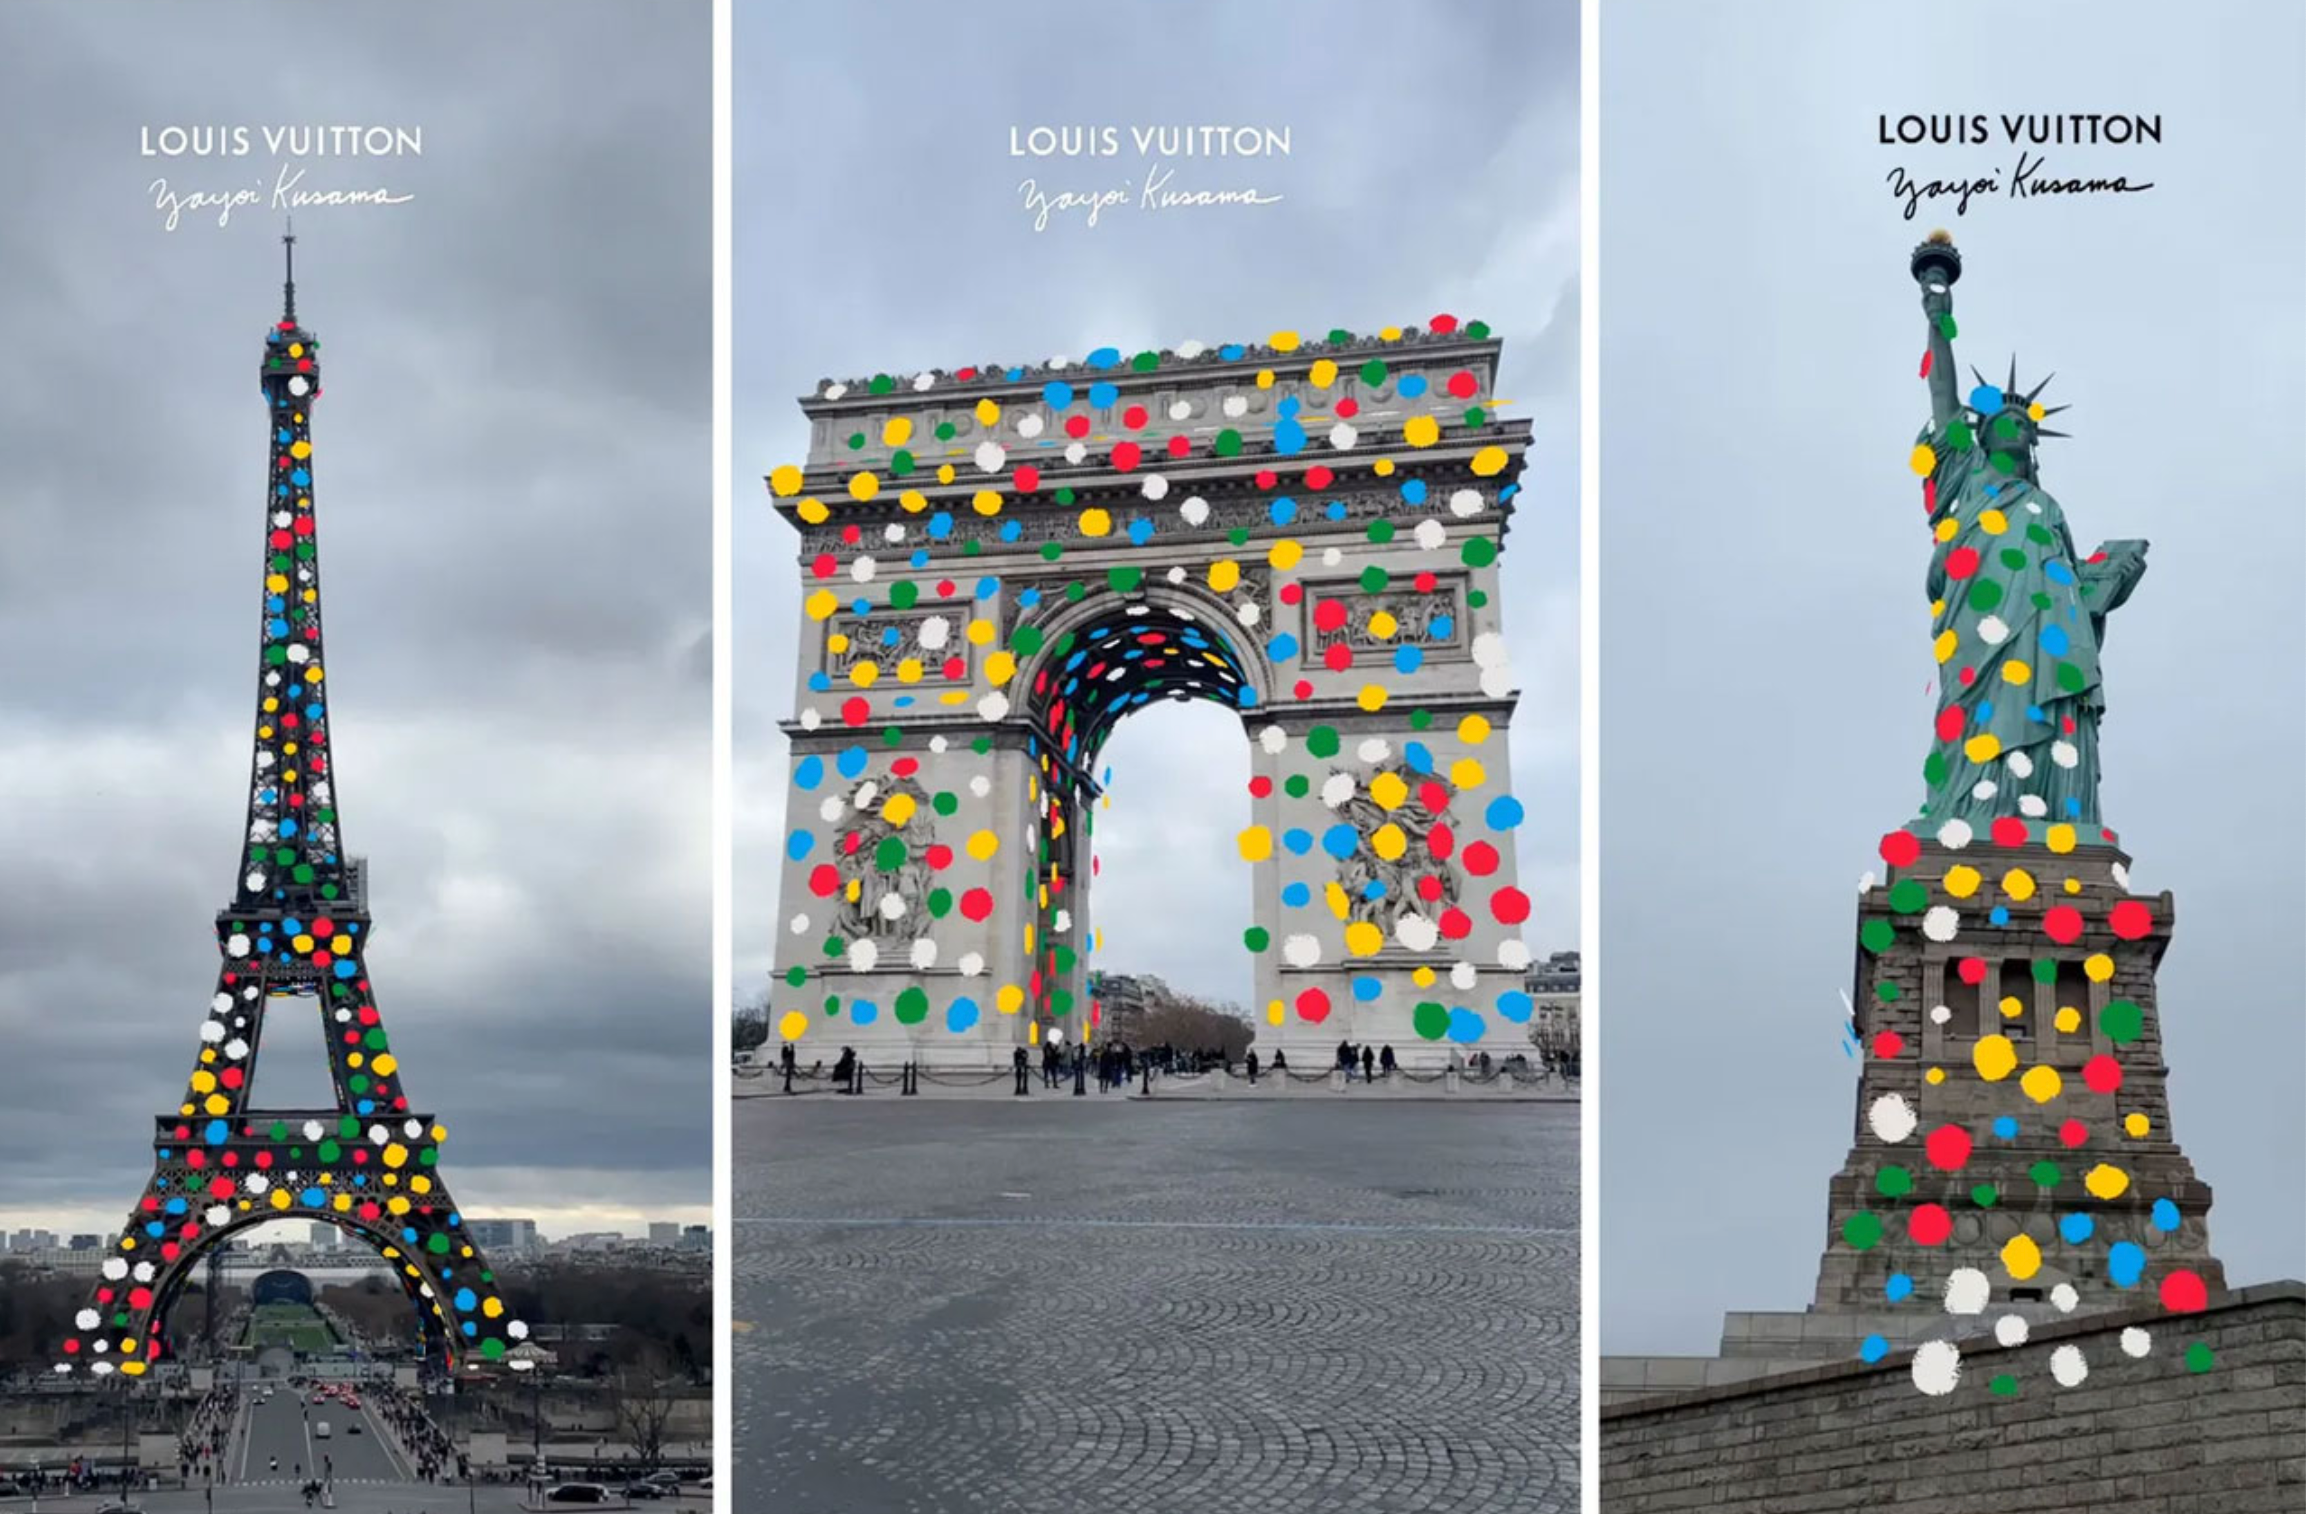 Louis Vuitton Uses AR To Cover Landmarks With Yayoi Kusama’s Iconic Dots